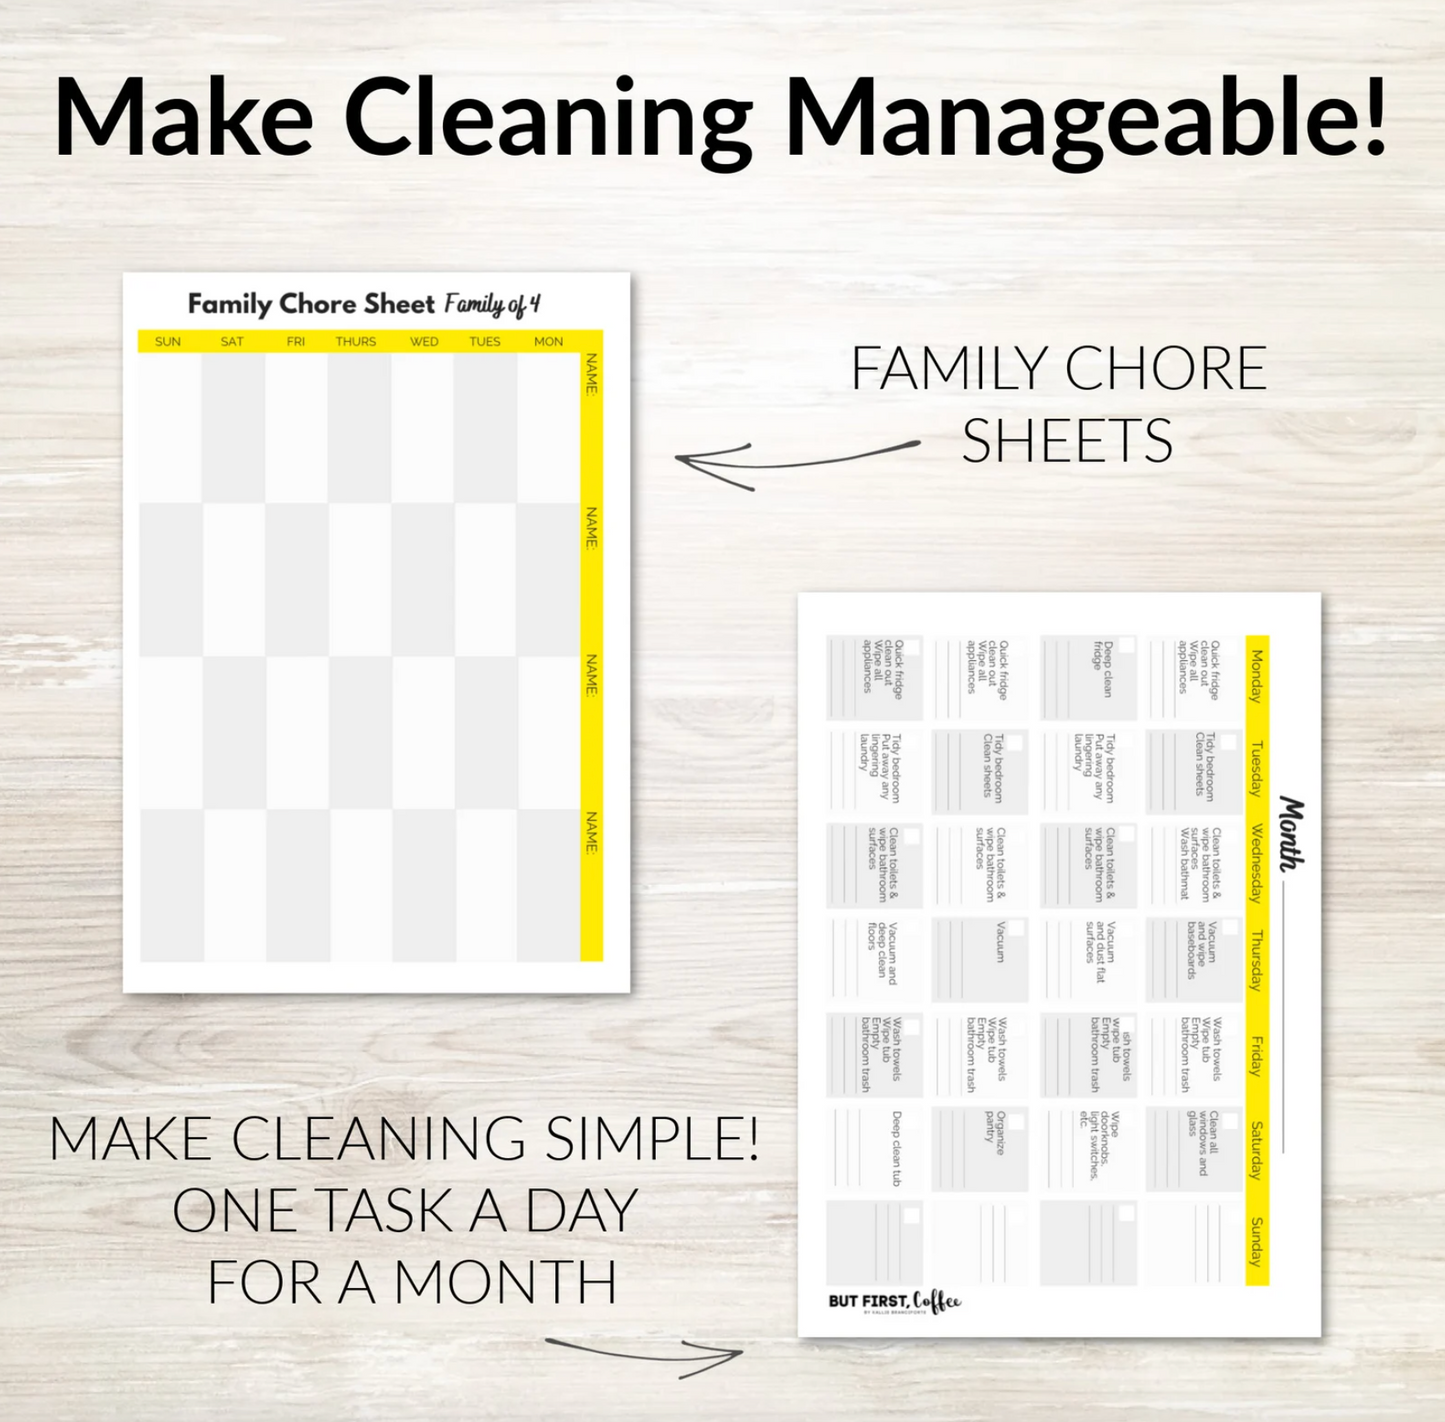 Cleaning Checklists and Schedules